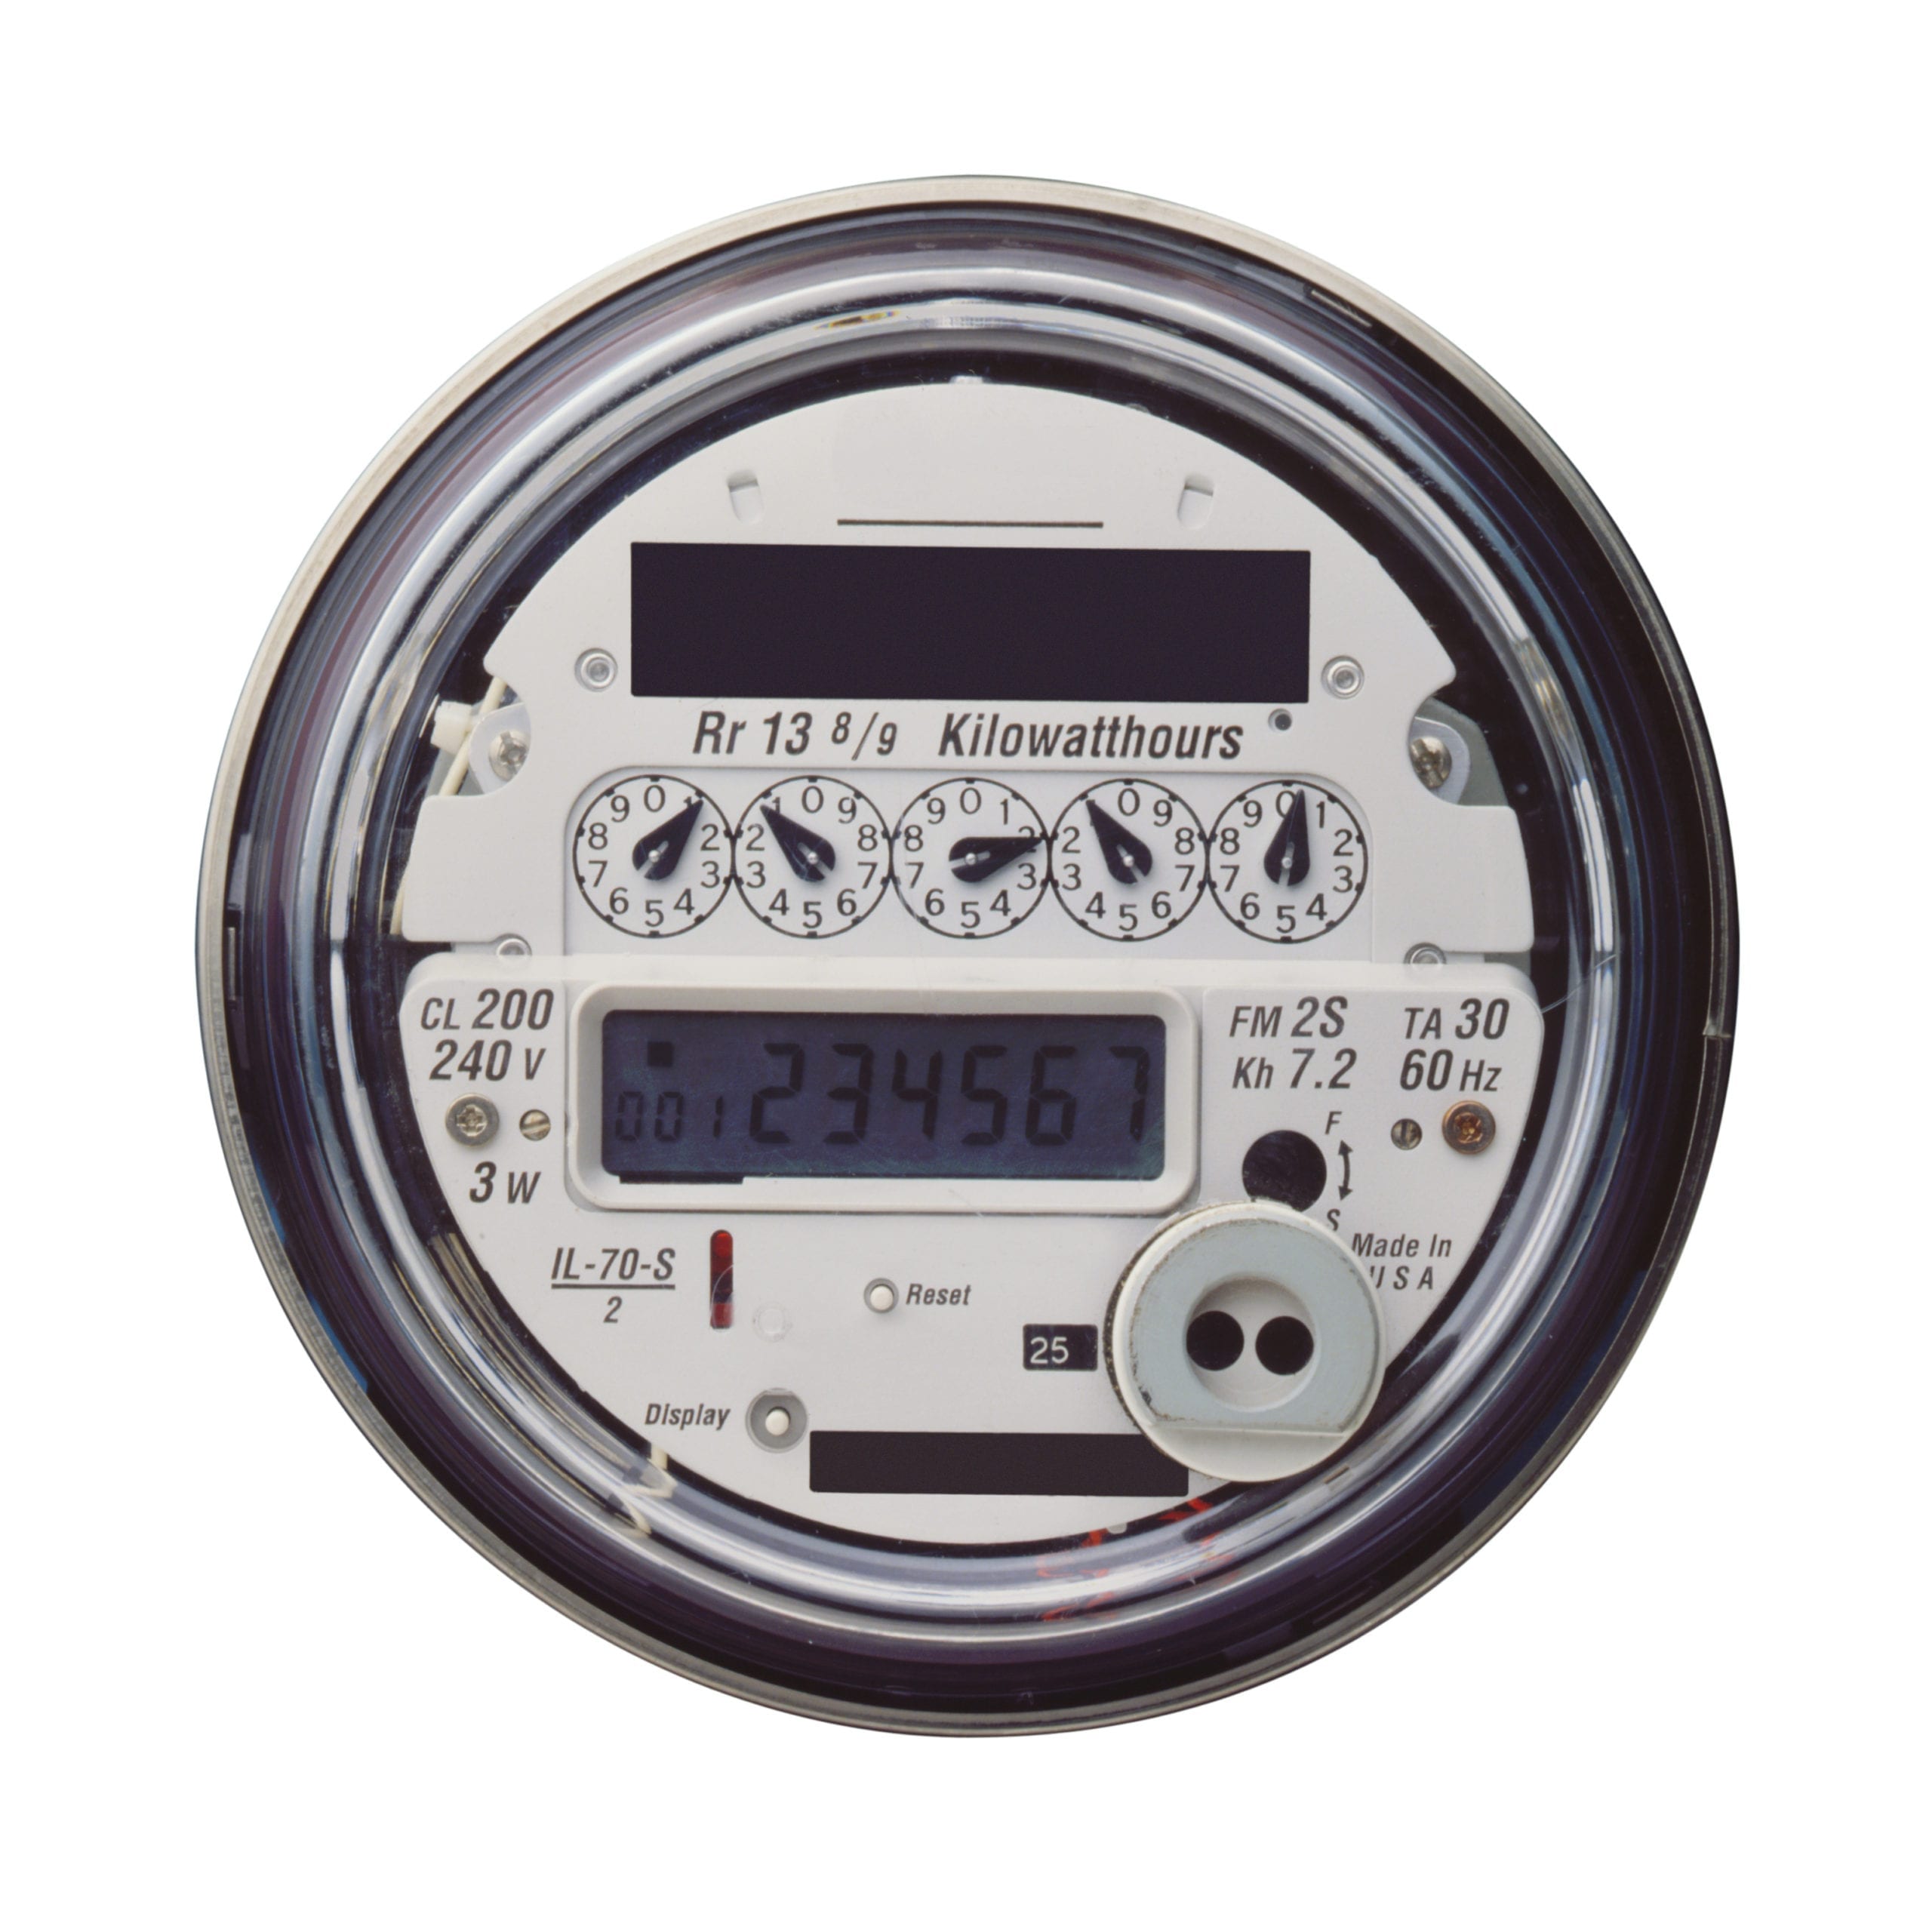 Denver Electrician Explains How to Read Your Home Electric Meter